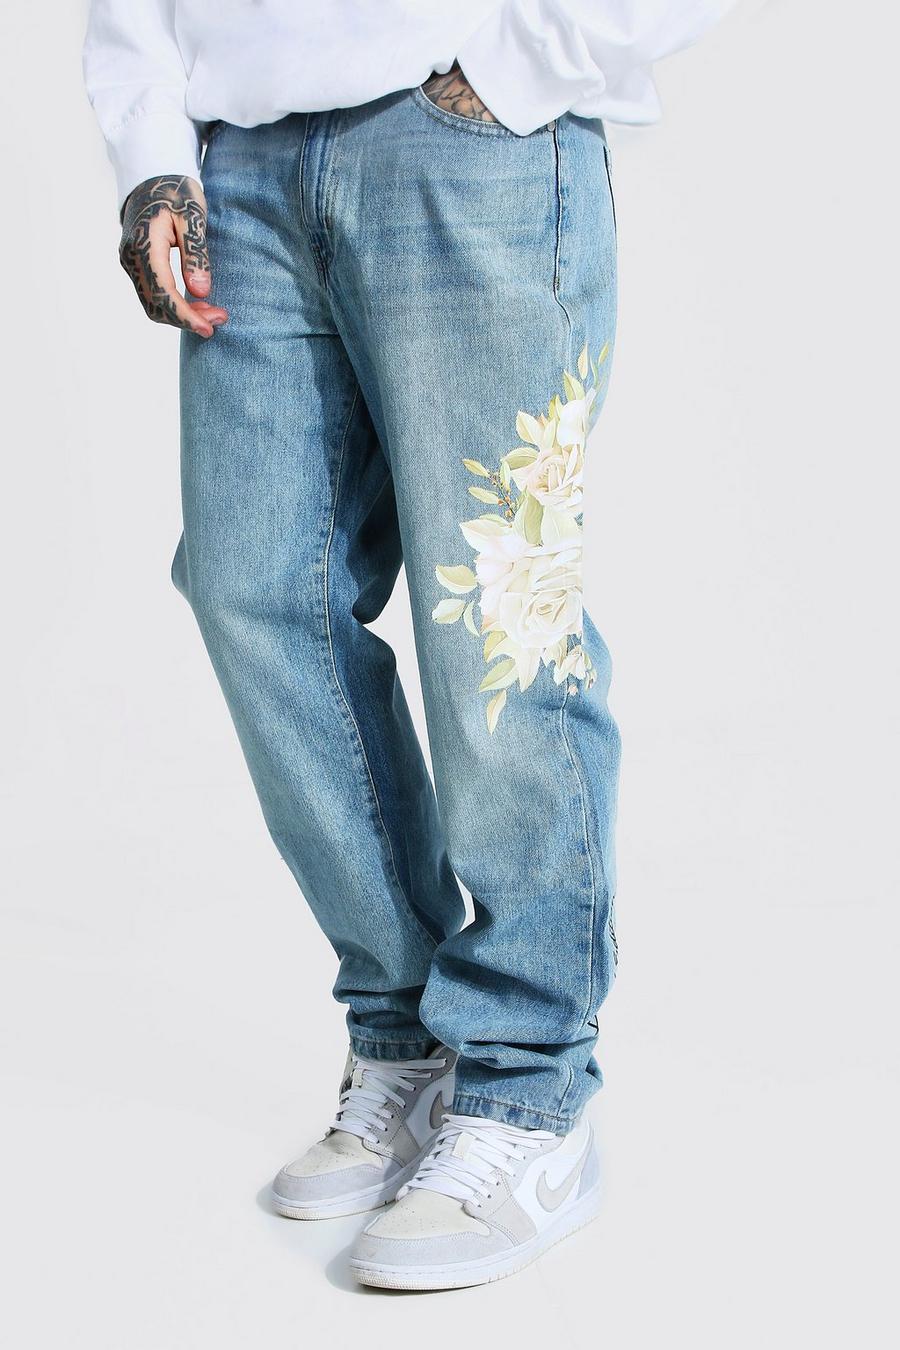  VooZuGn Fashion Jeans Men Denim Flowers of Embroidery Jeans Men  : Clothing, Shoes & Jewelry